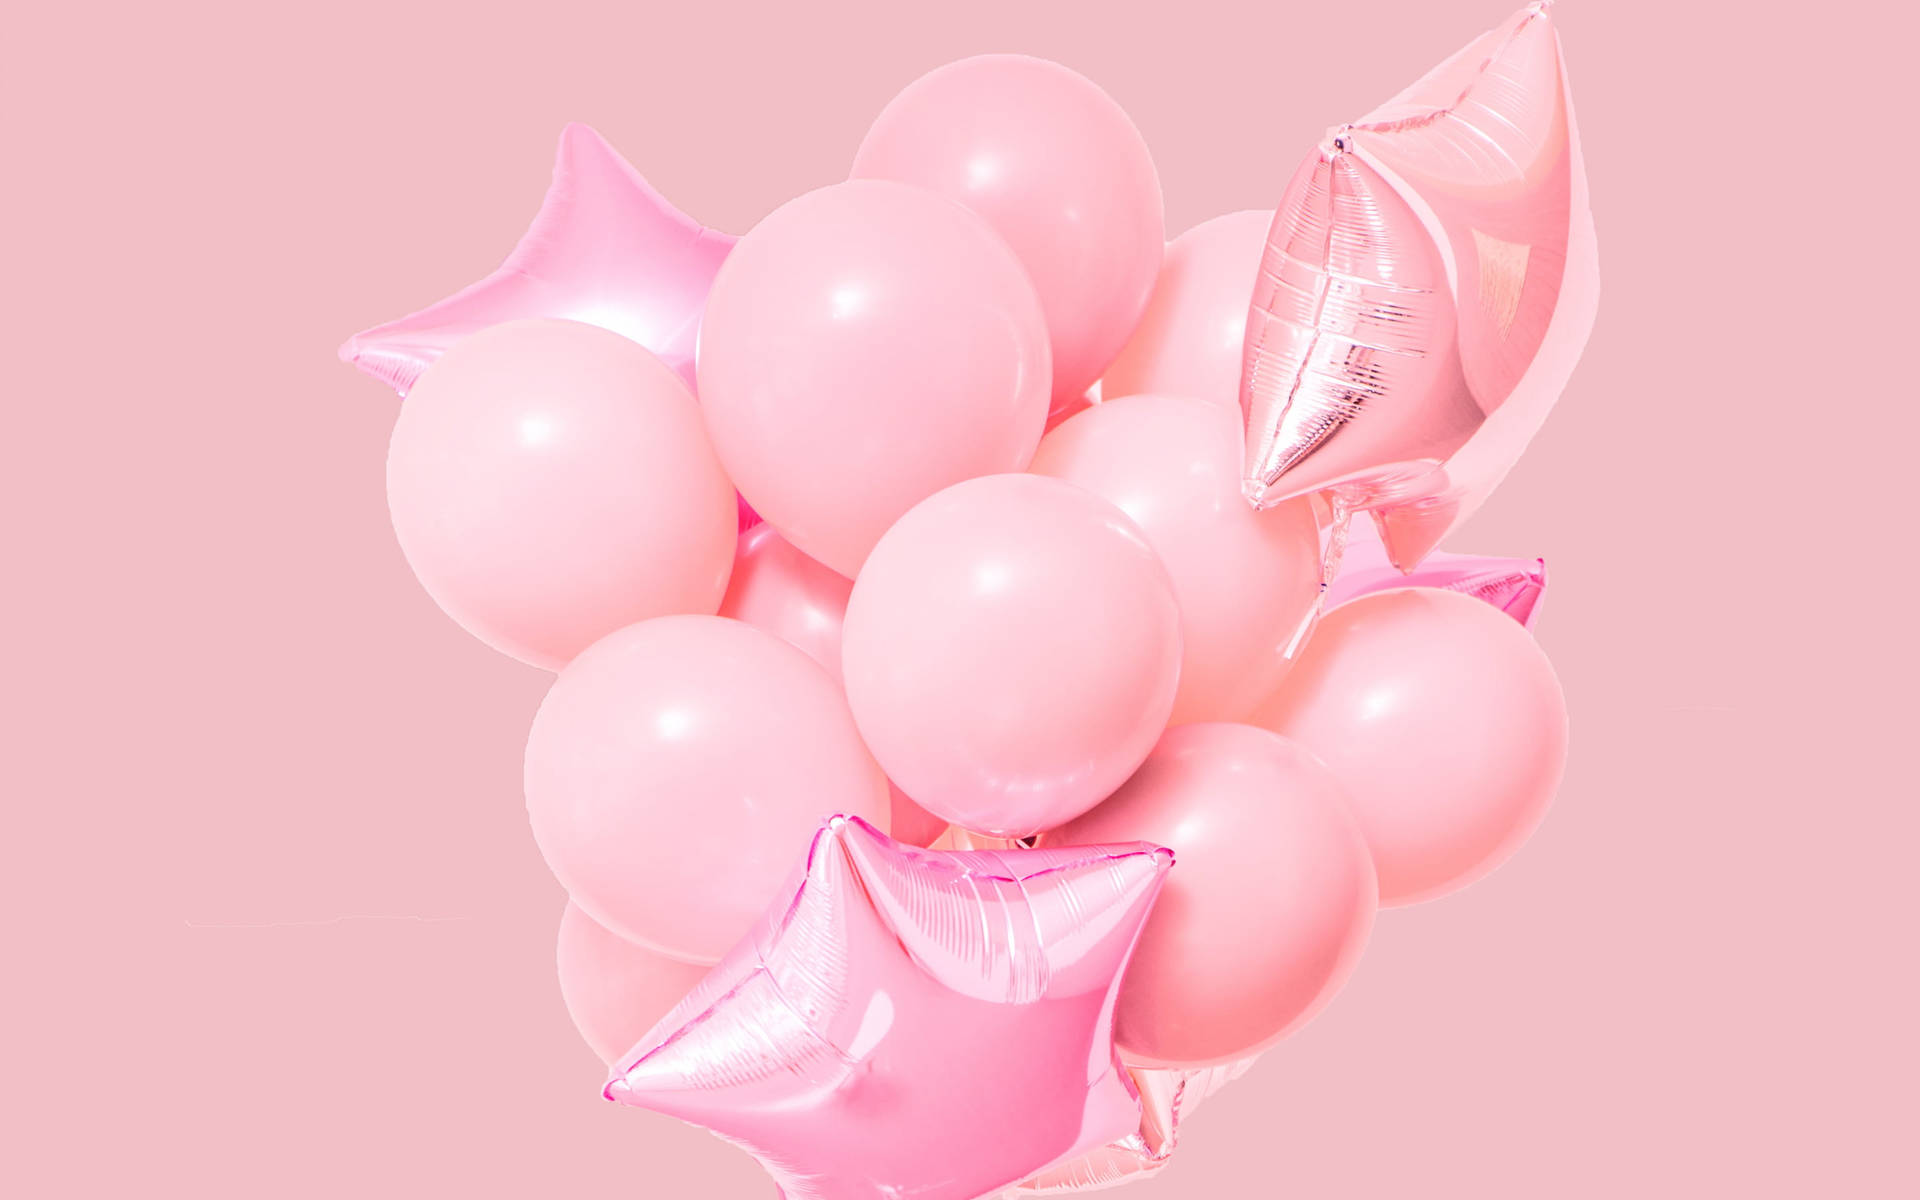 Balloons On Pink Background